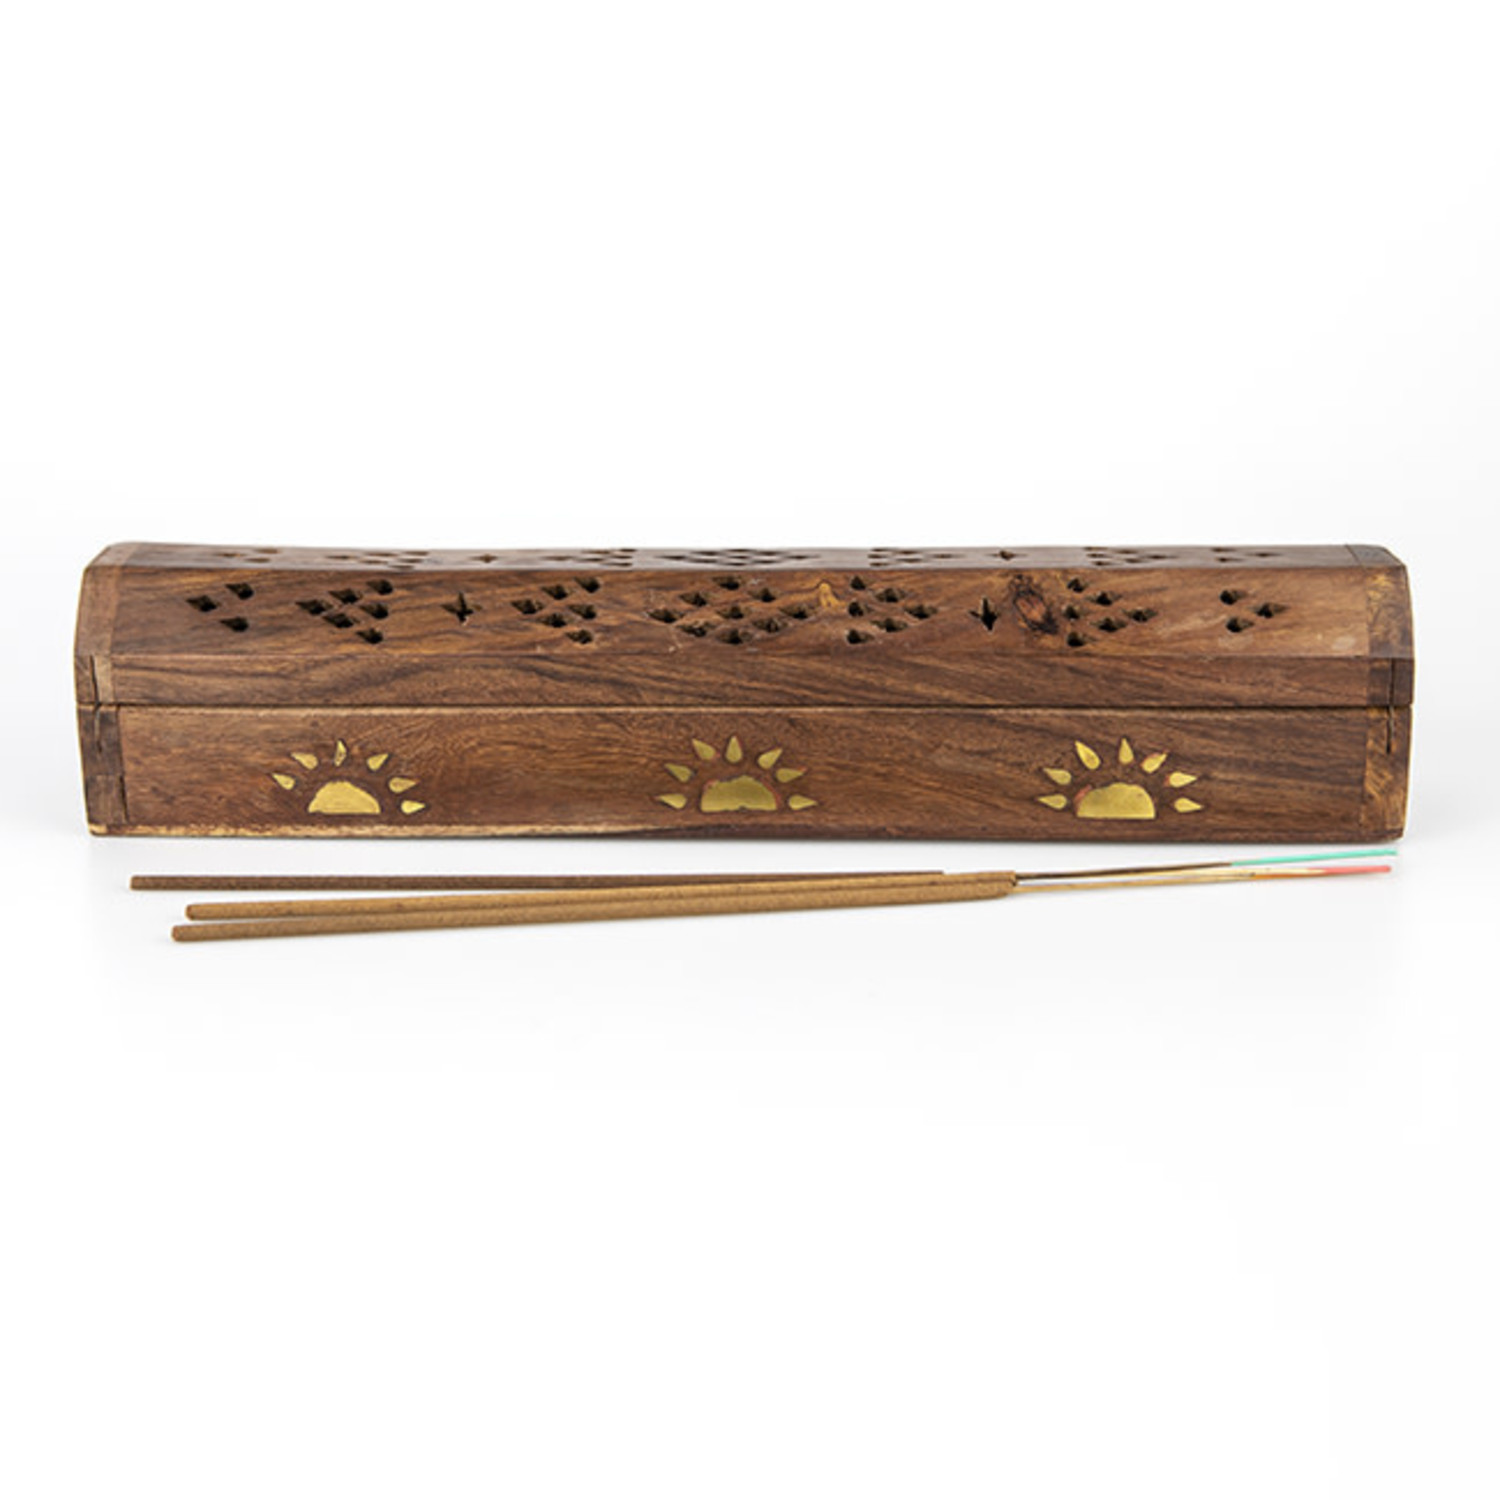 Wooden Incense Box / Storage Box, with Skull – All My Relations